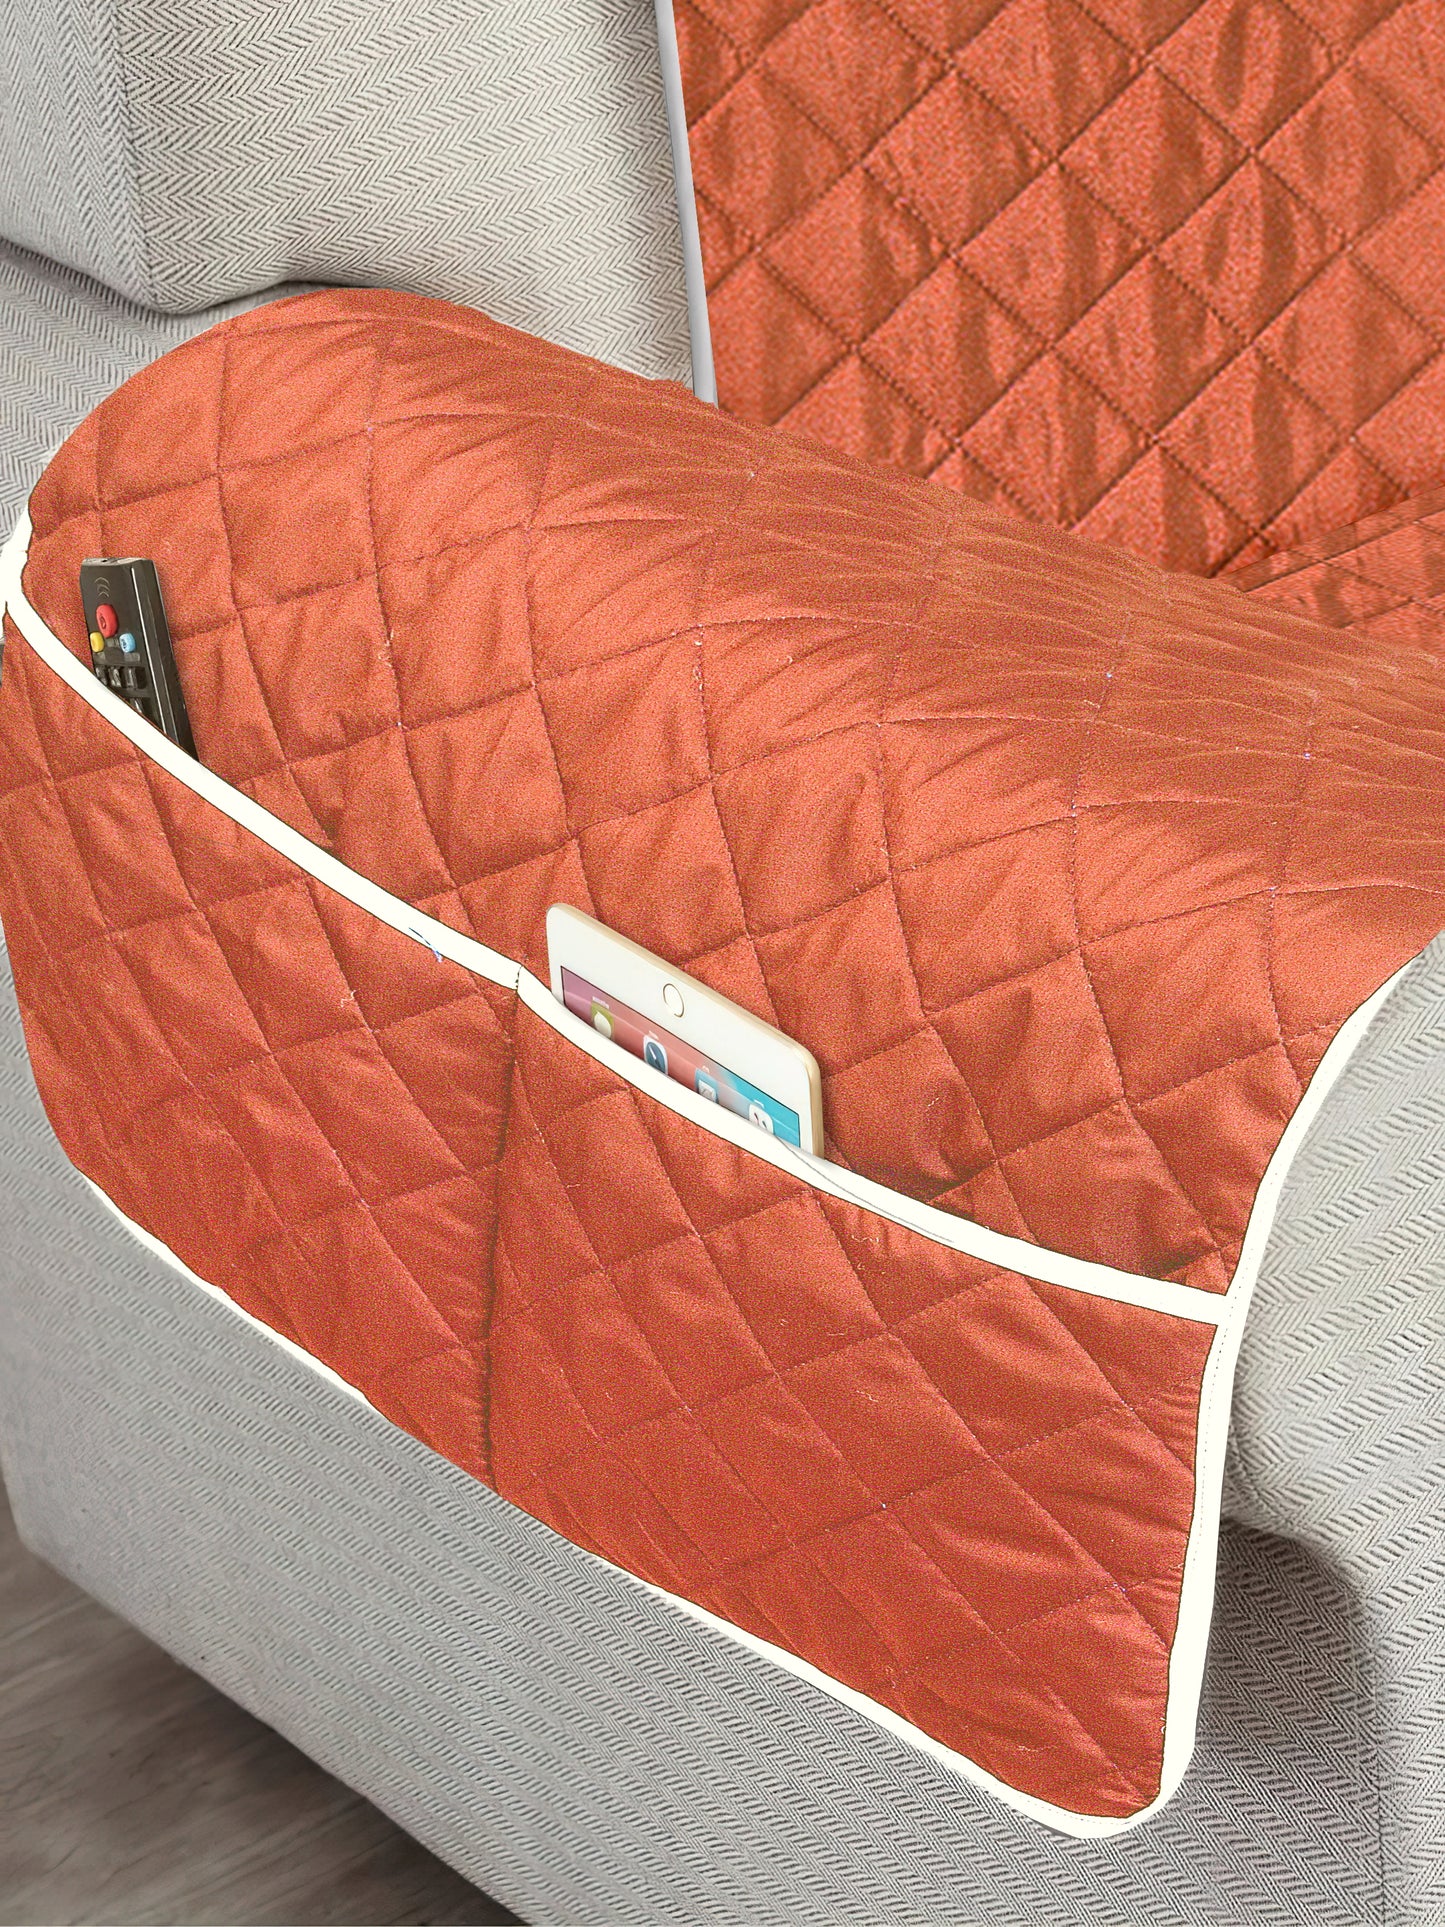 Reversible Quilted Polyester Solid Sofa Cover 1 Seater- Orange & Brown